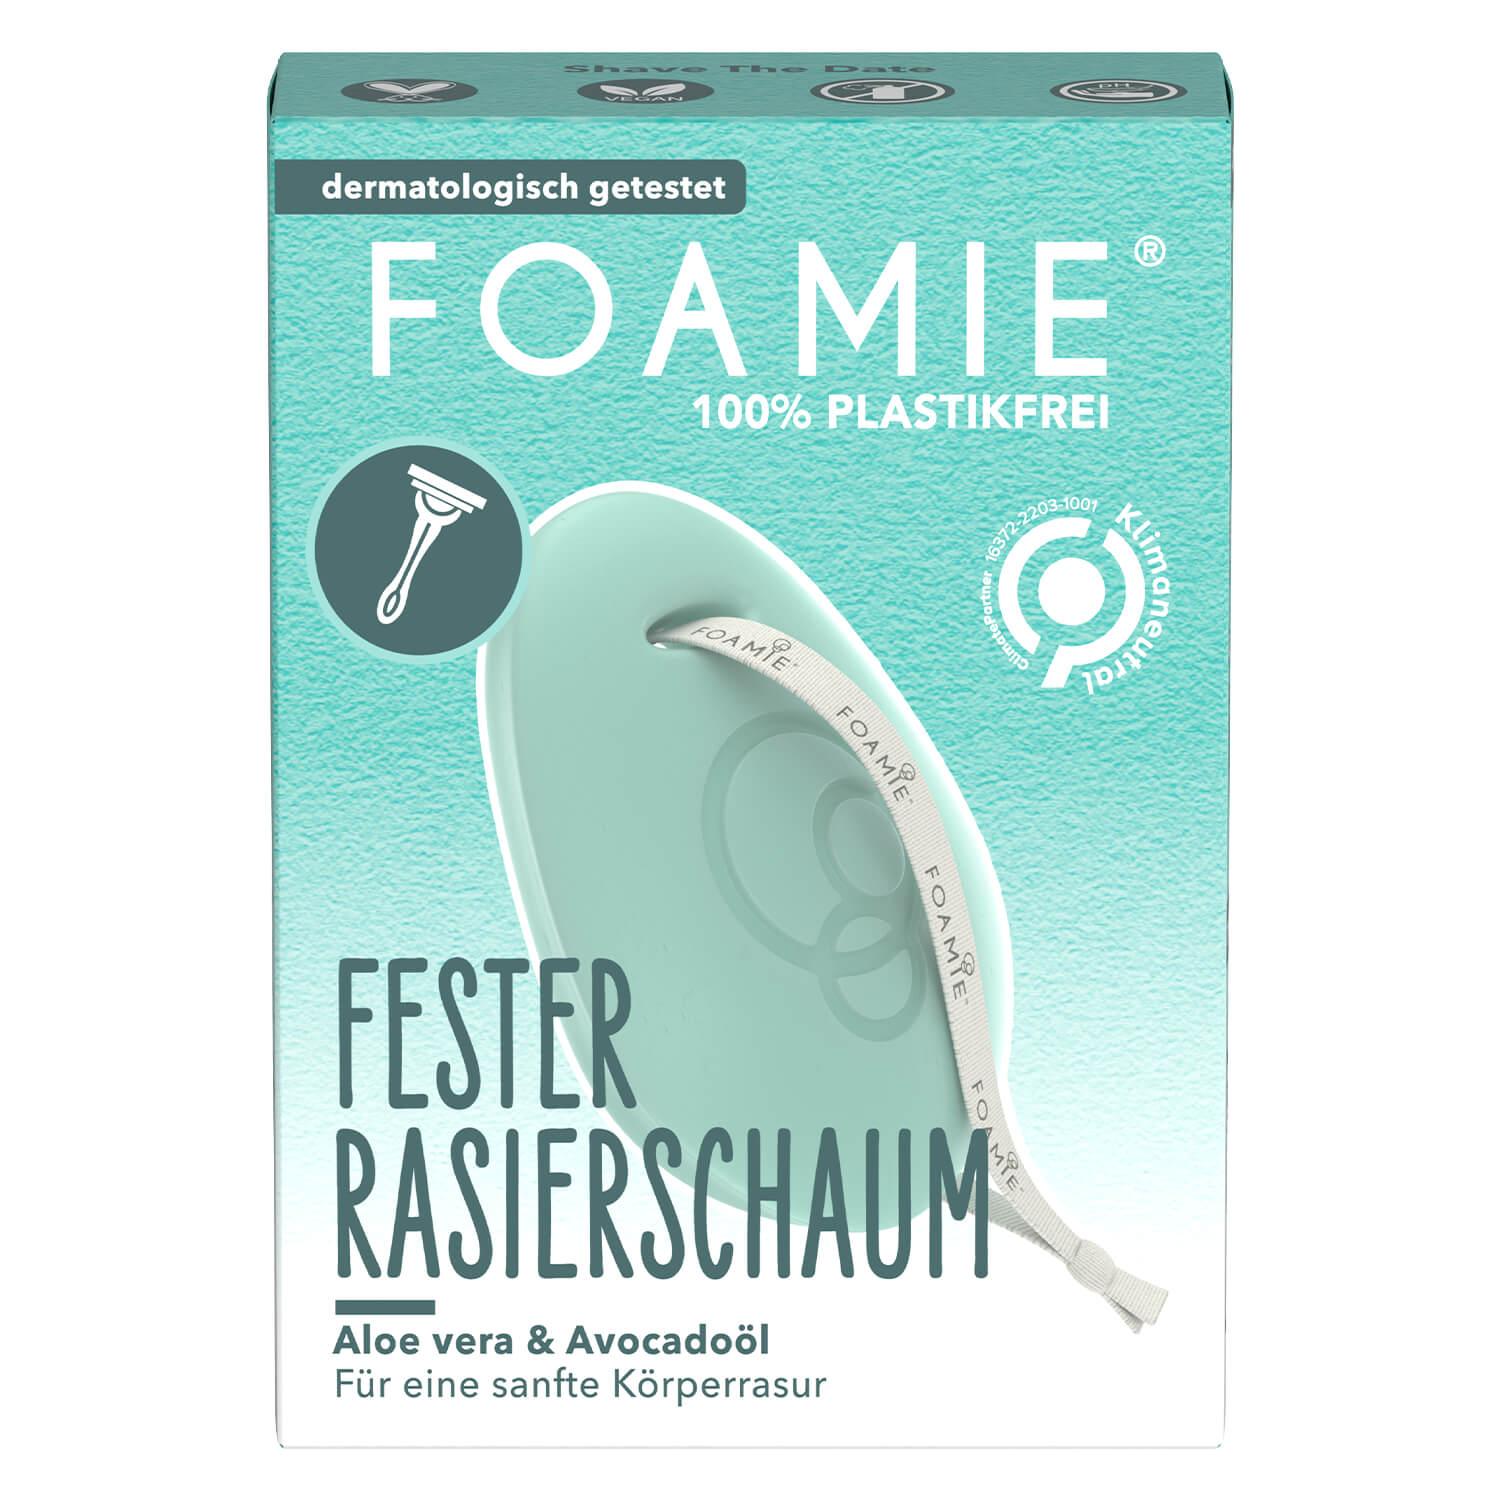 Foamie - Fester Rasierschaum Aloe You Very Much / Shave The Date